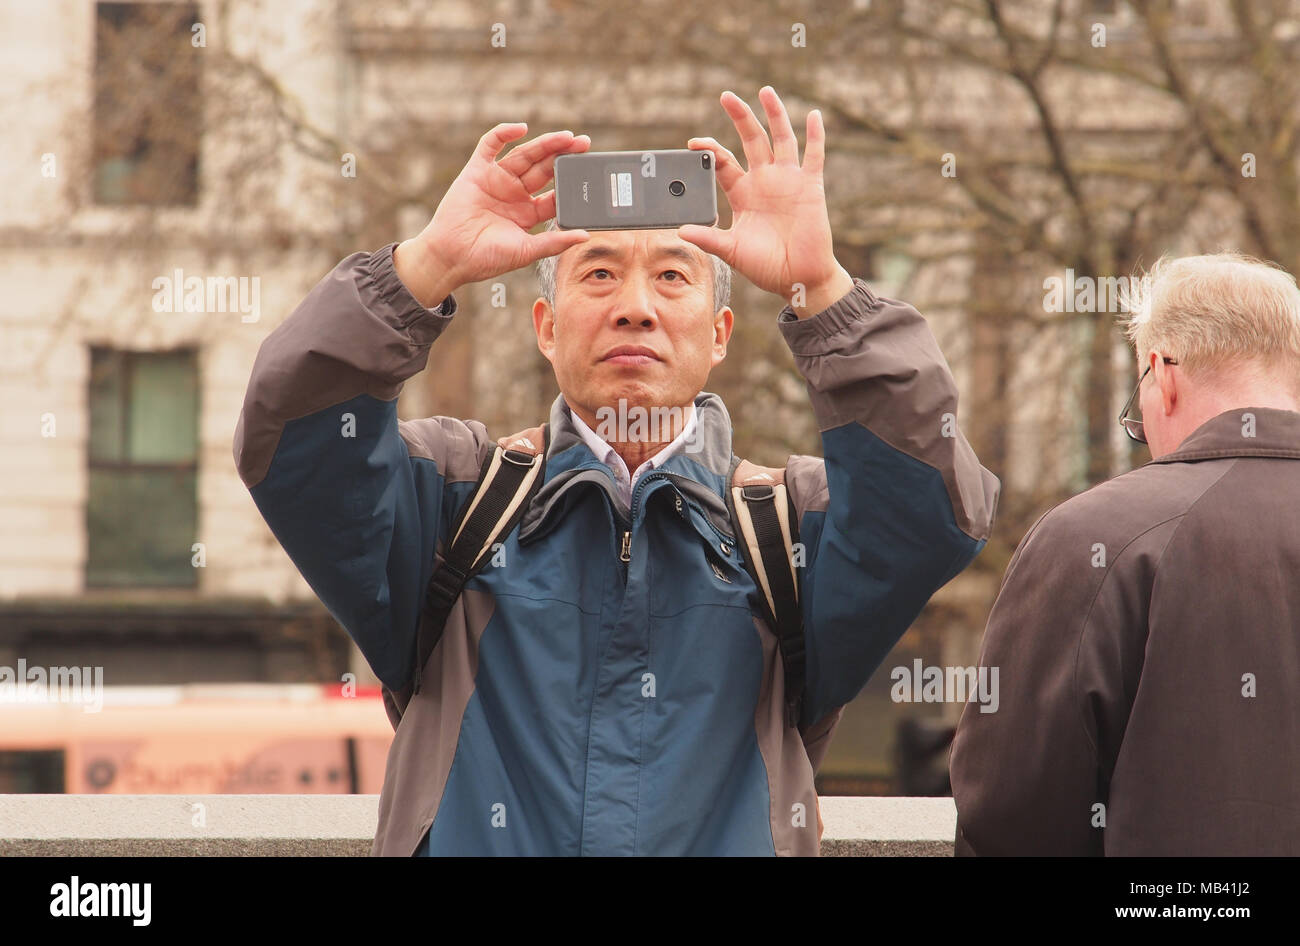 A man holding a smartphone above his eye level composing a photograph in Trafalgar Square, London Stock Photo